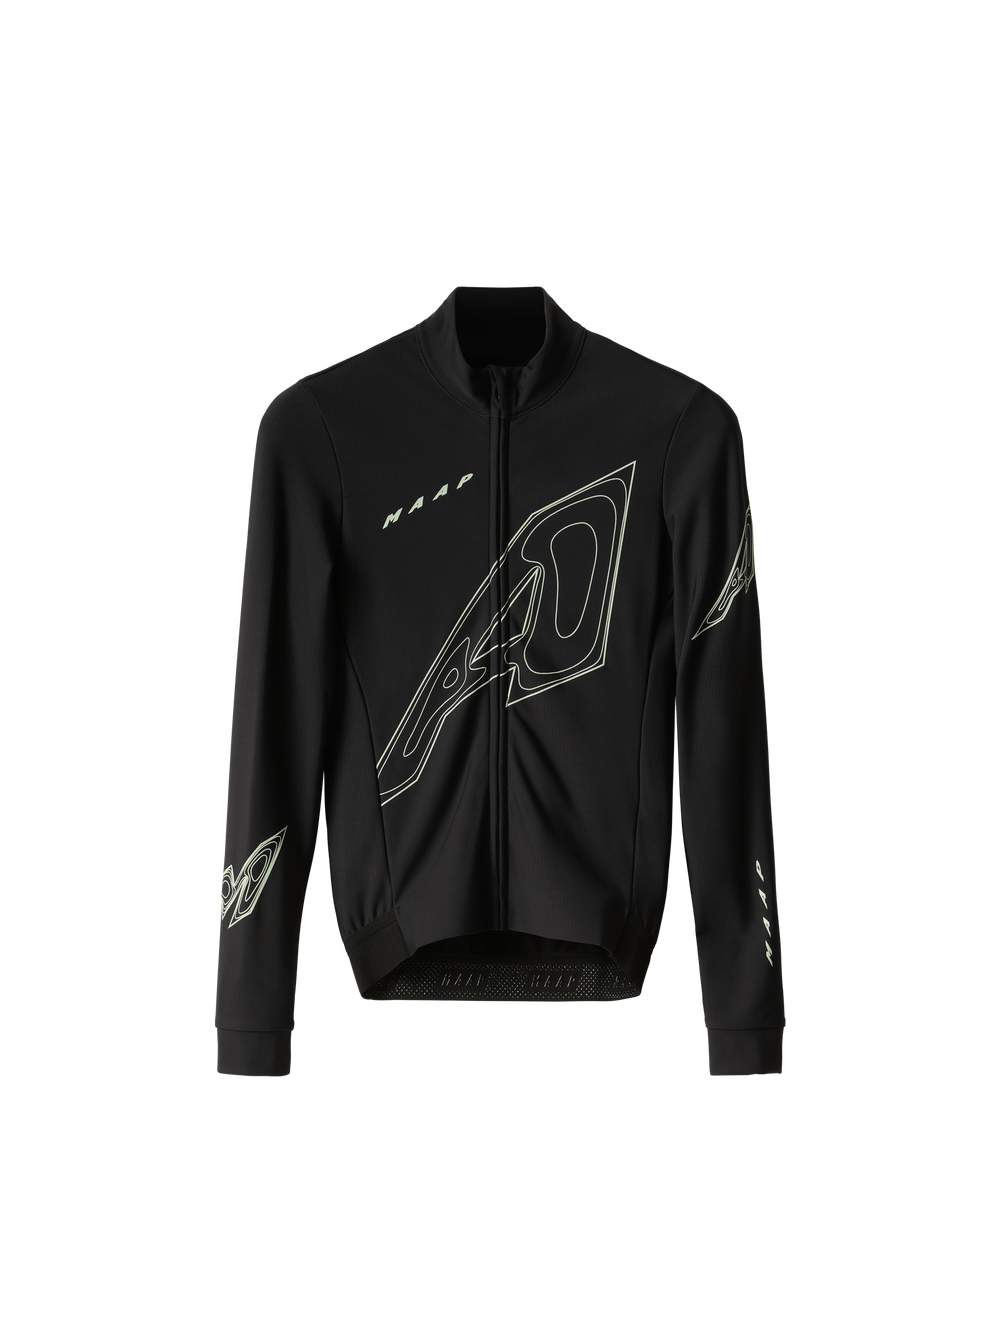 Product Image for Orbit Pro Thermal LS Jersey